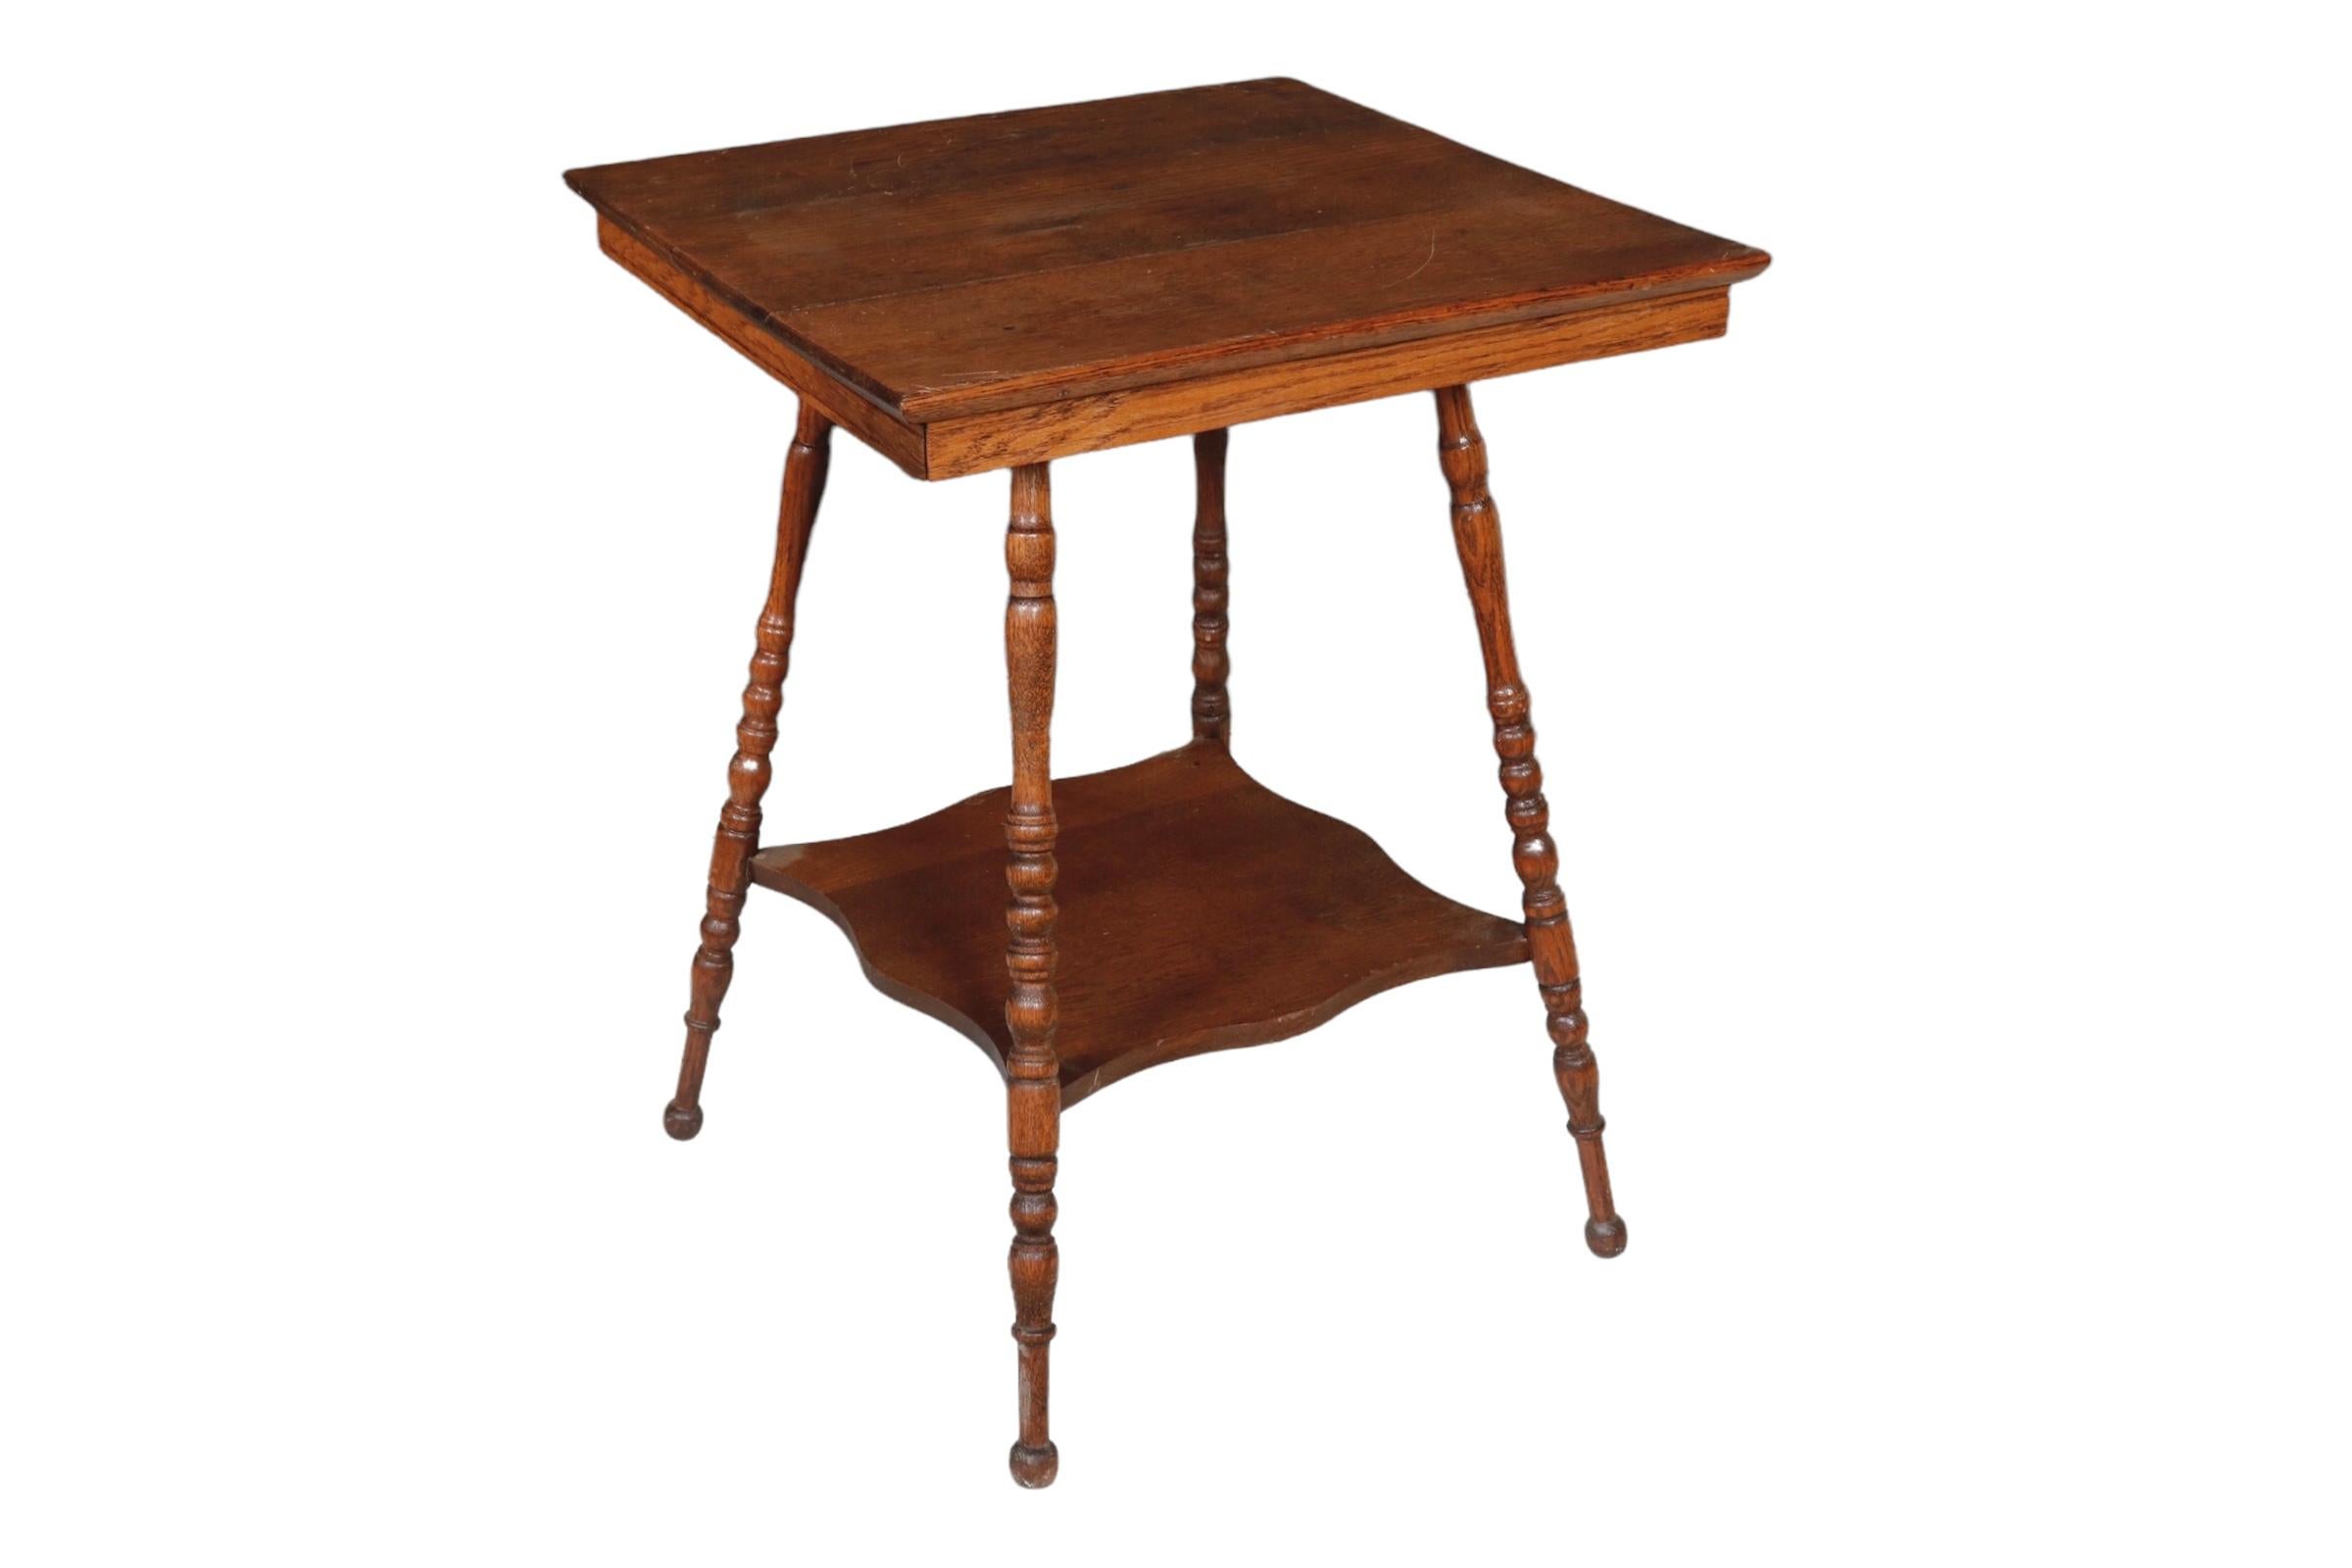 An antique oak parlor table with turned legs from the Victorian period. USA, circa early 20th century.

Features a lower shelf and carved apron.

Dimensions: 24” L x 24” W x 30” H.
 